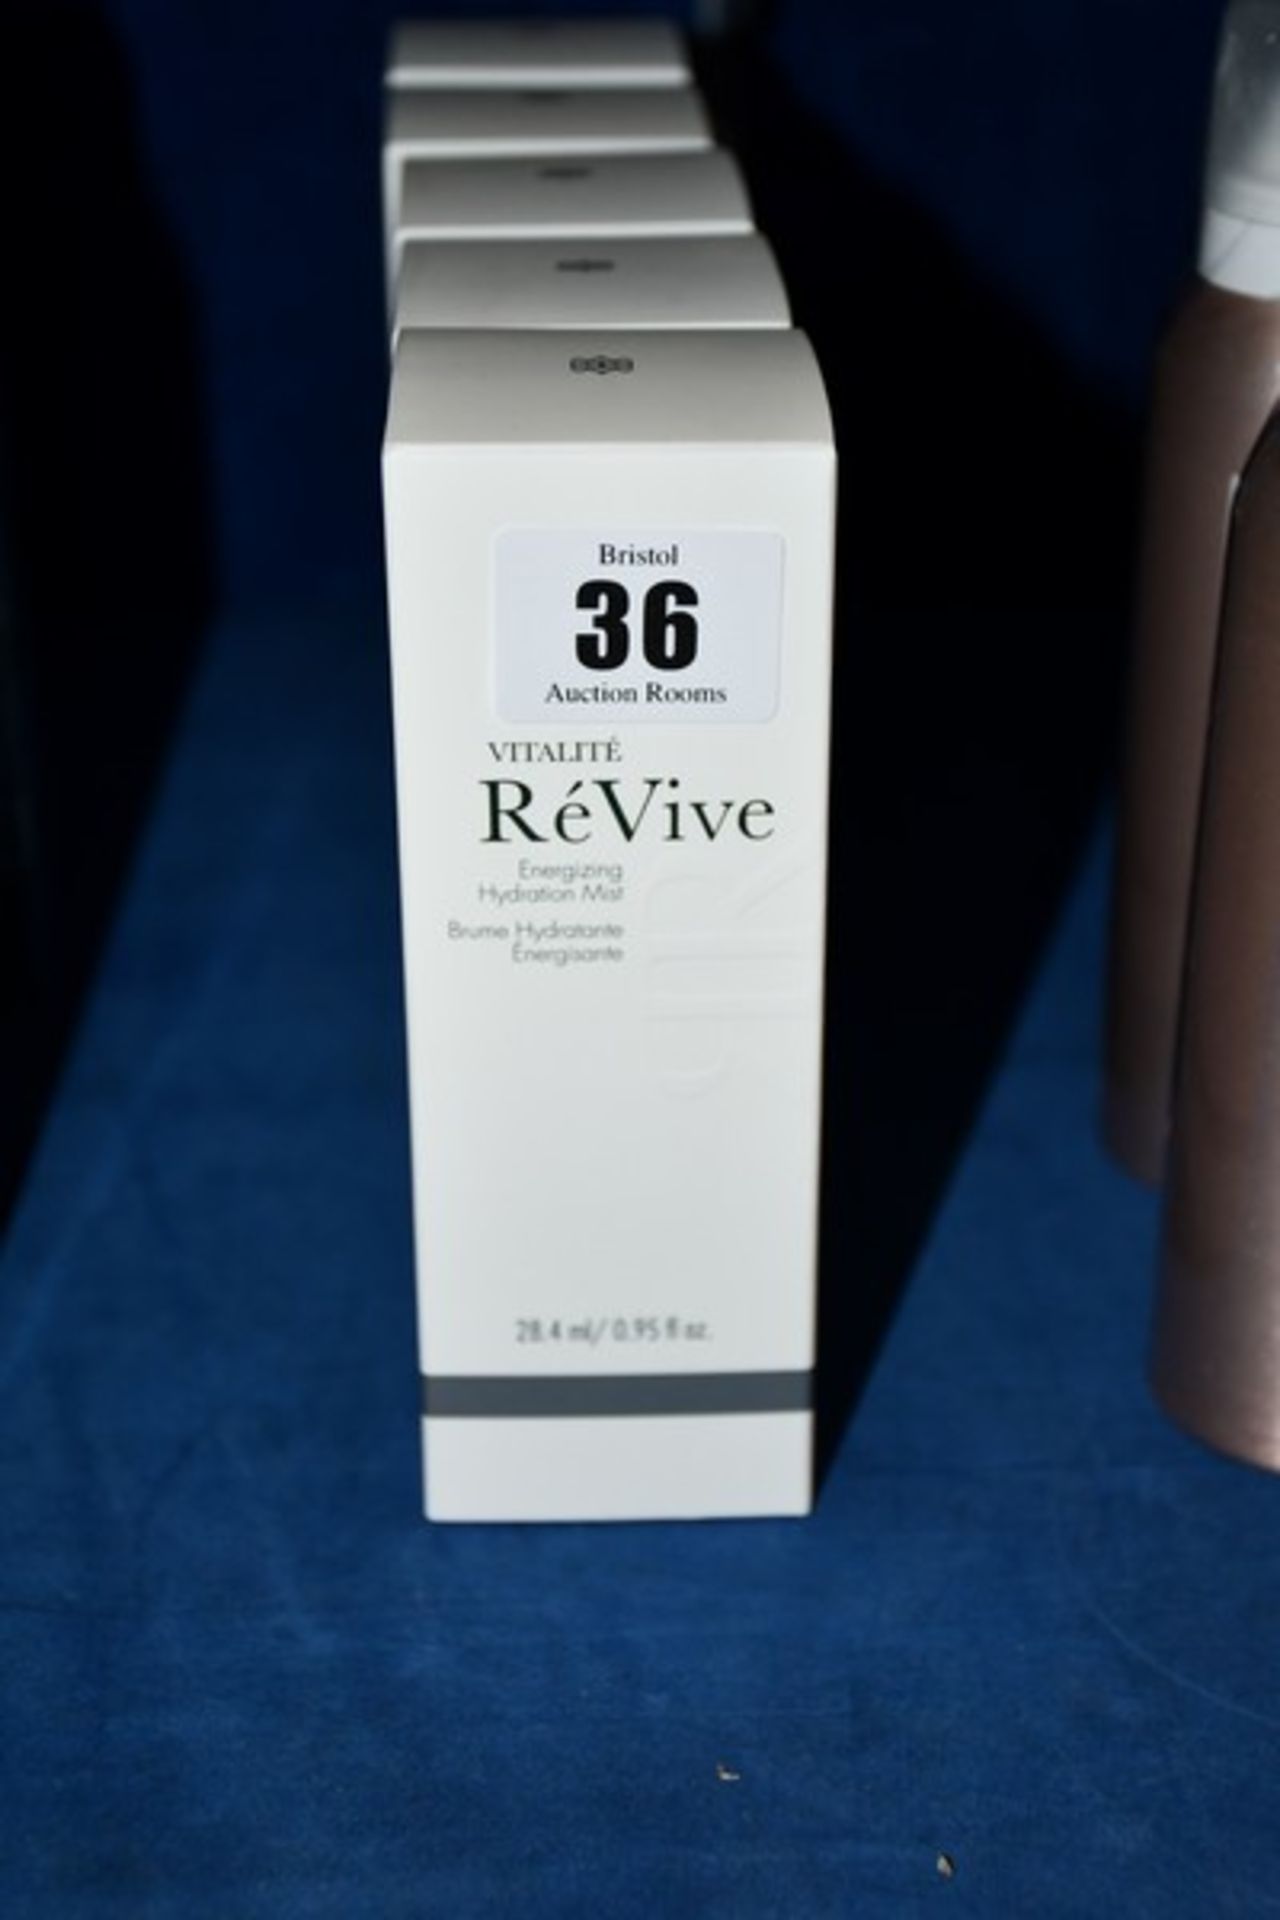 Five boxed as new Vitalite ReVive energizing hydration mist (28.4ml).